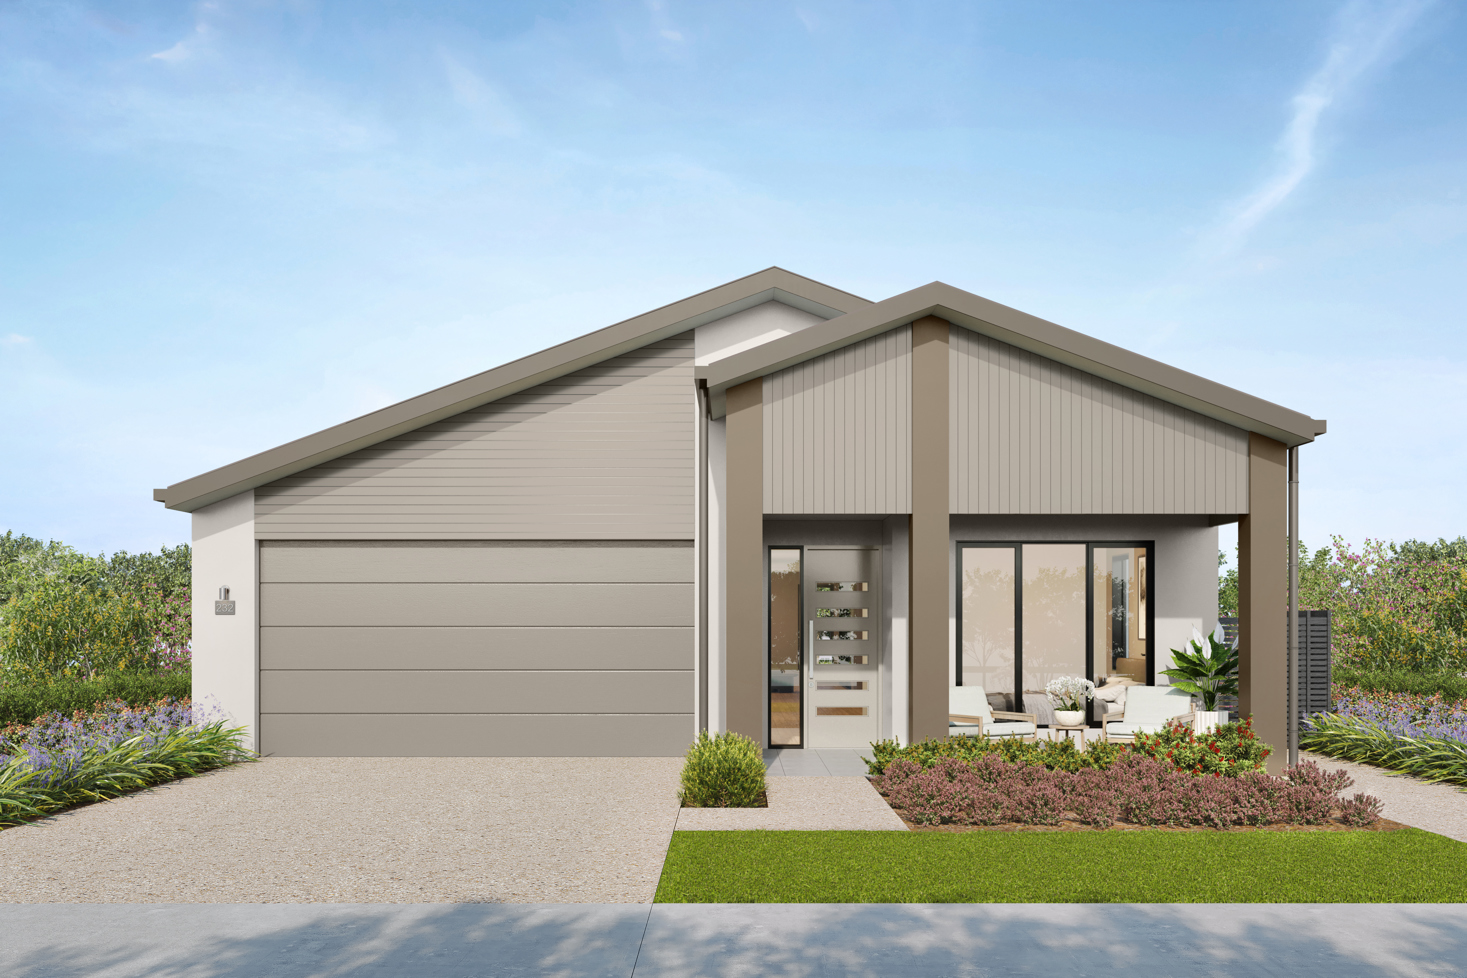 Facade render of the Springbrook G3 house design with a gable roofline in country colour scheme, located at Stockland Halcyon Gables in The Hills district.